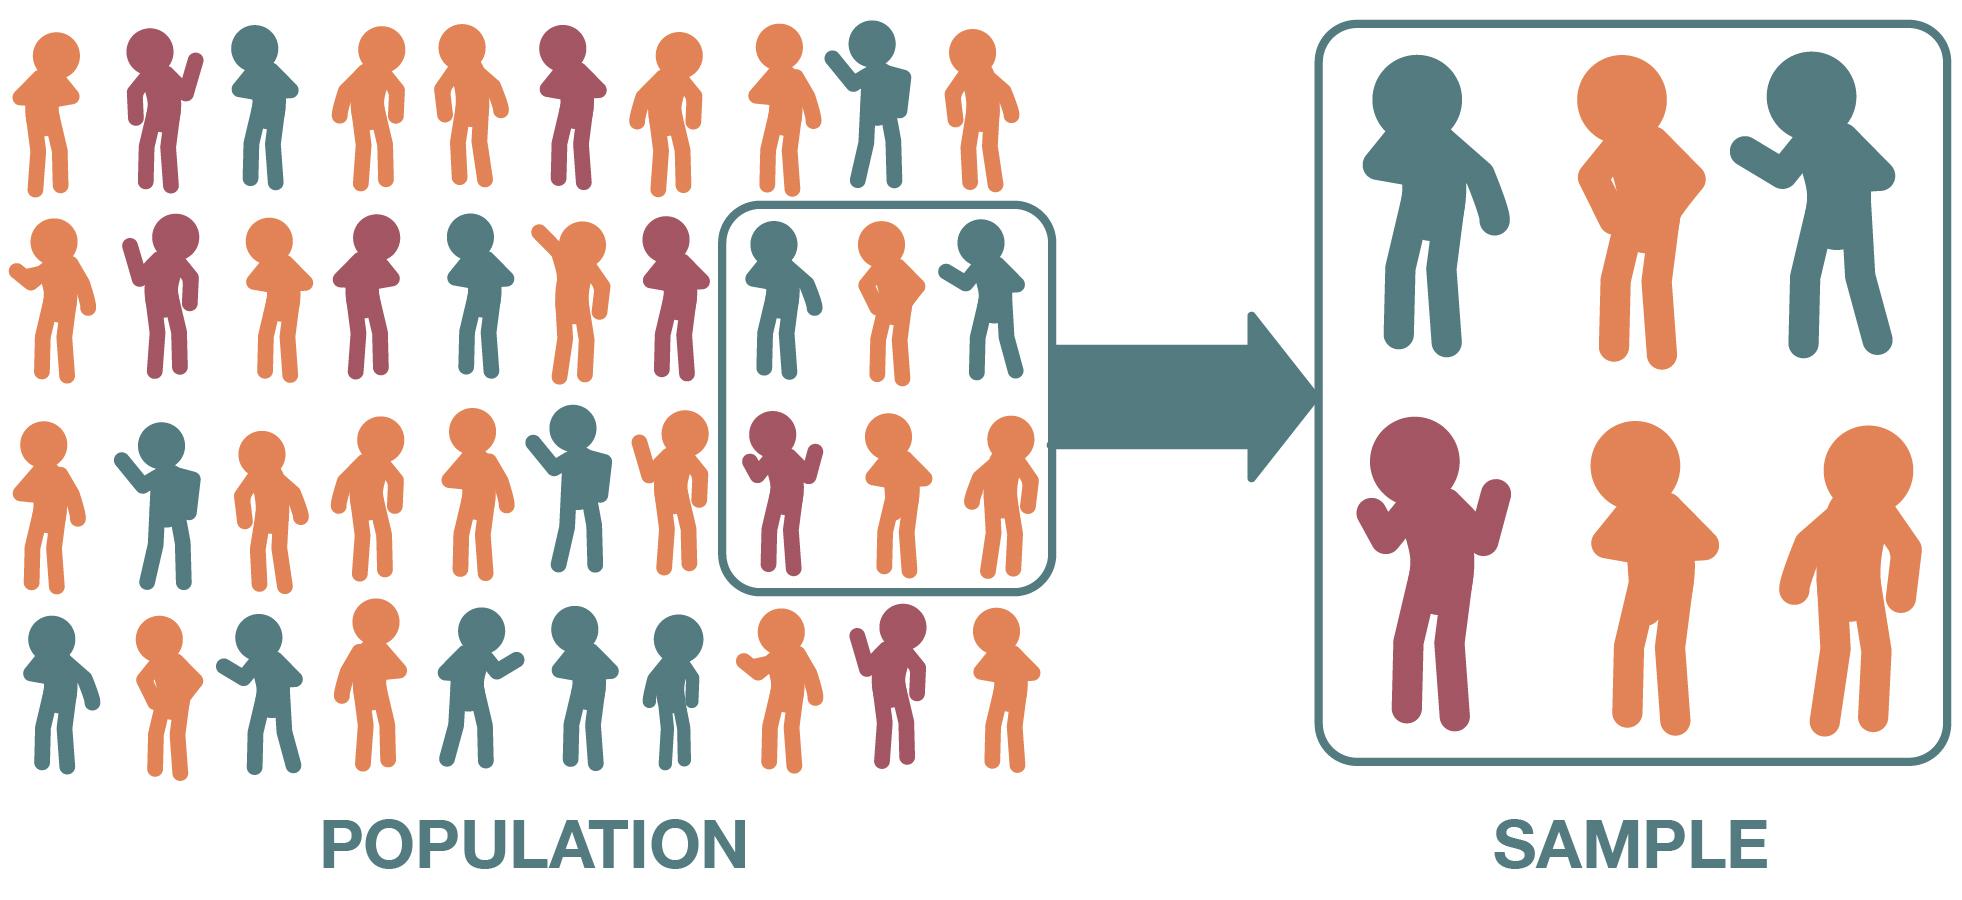 Cartoon depictions of a large group of people representing a population. Six of them are selected to represent the sample.